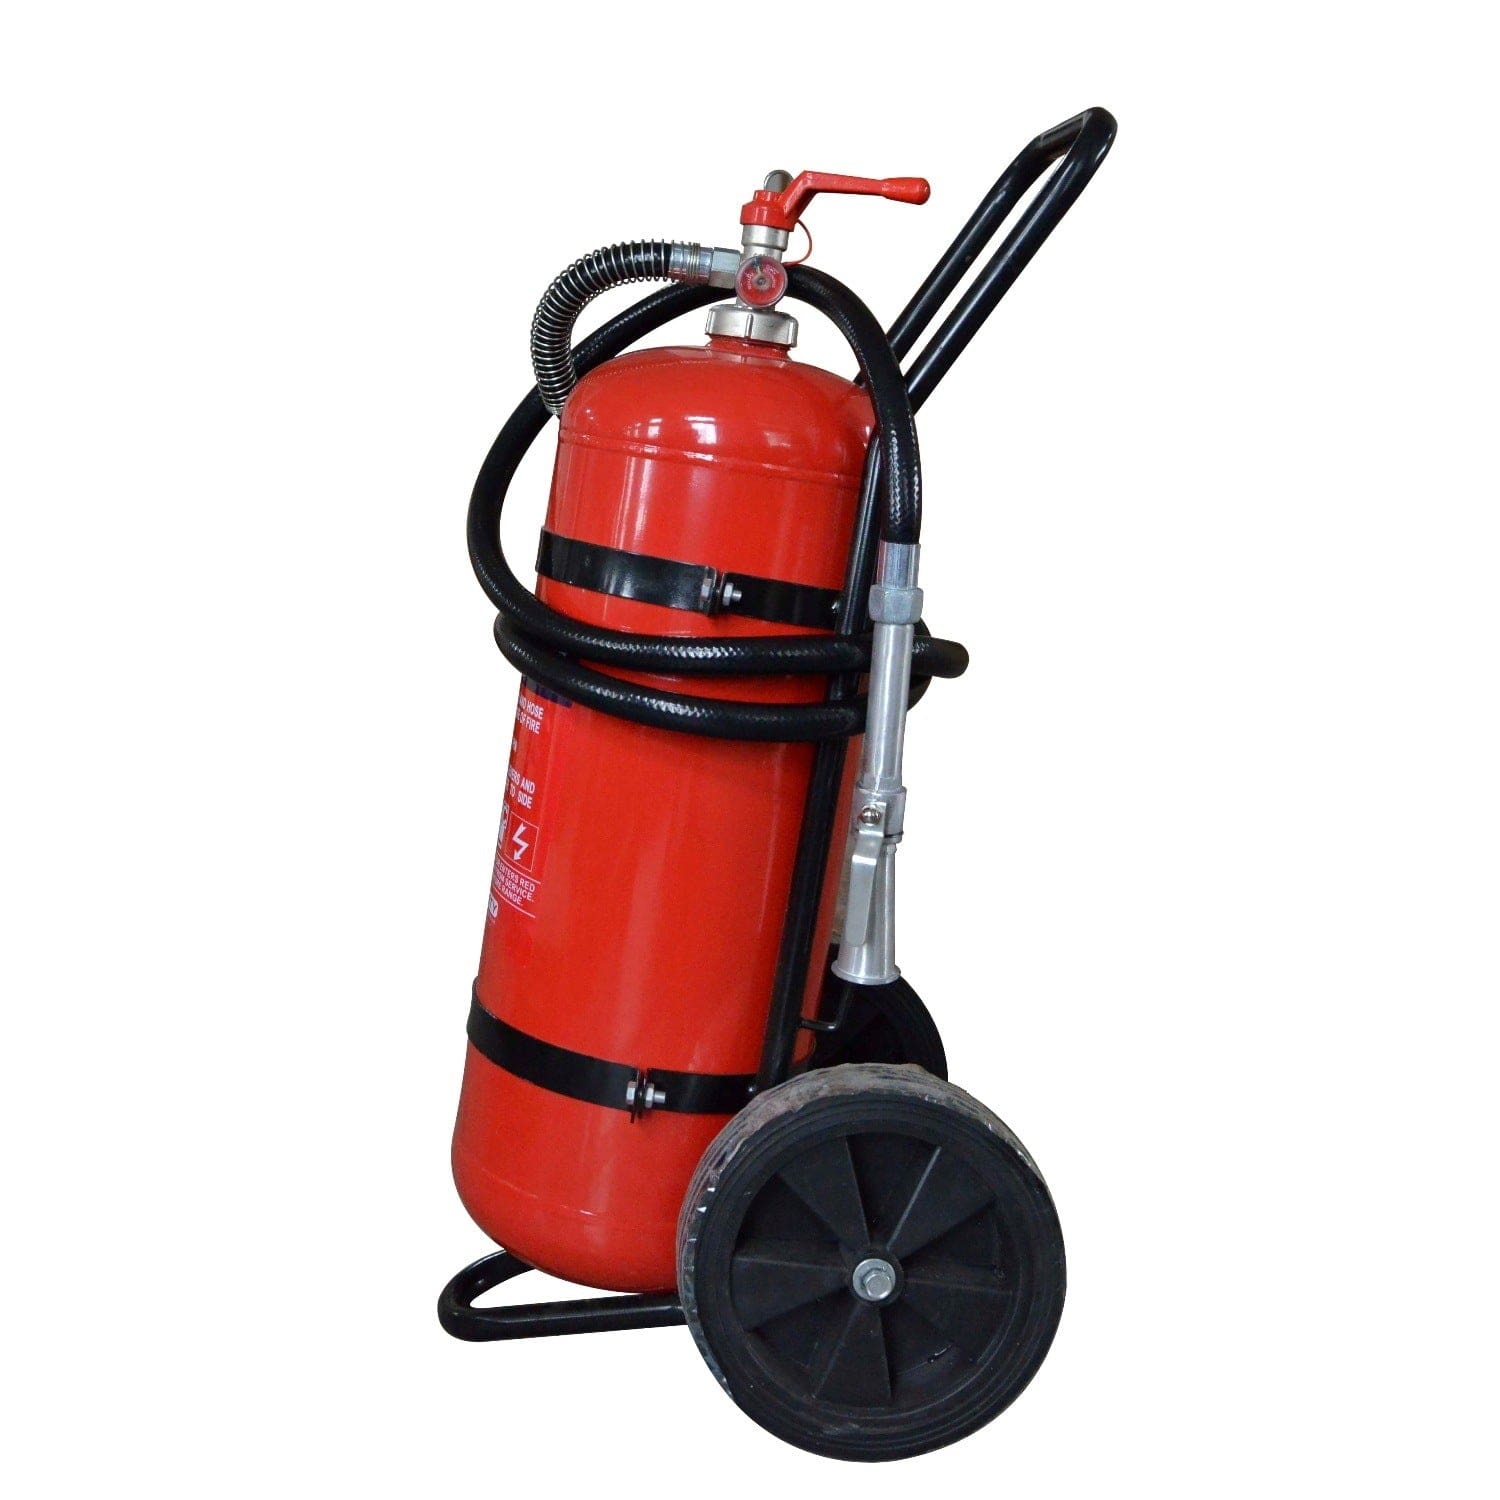 Ensure fire safety with the Lords CO2 Mobile Trolley Extinguisher 45kg. This portable and powerful extinguisher is filled with CO2, making it suitable for suppressing fires involving flammable liquids and electrical equipment. Buy now on Supply Master Ghana, Accra for reliable fire protection. Fire Extinguisher Buy Tools hardware Building materials